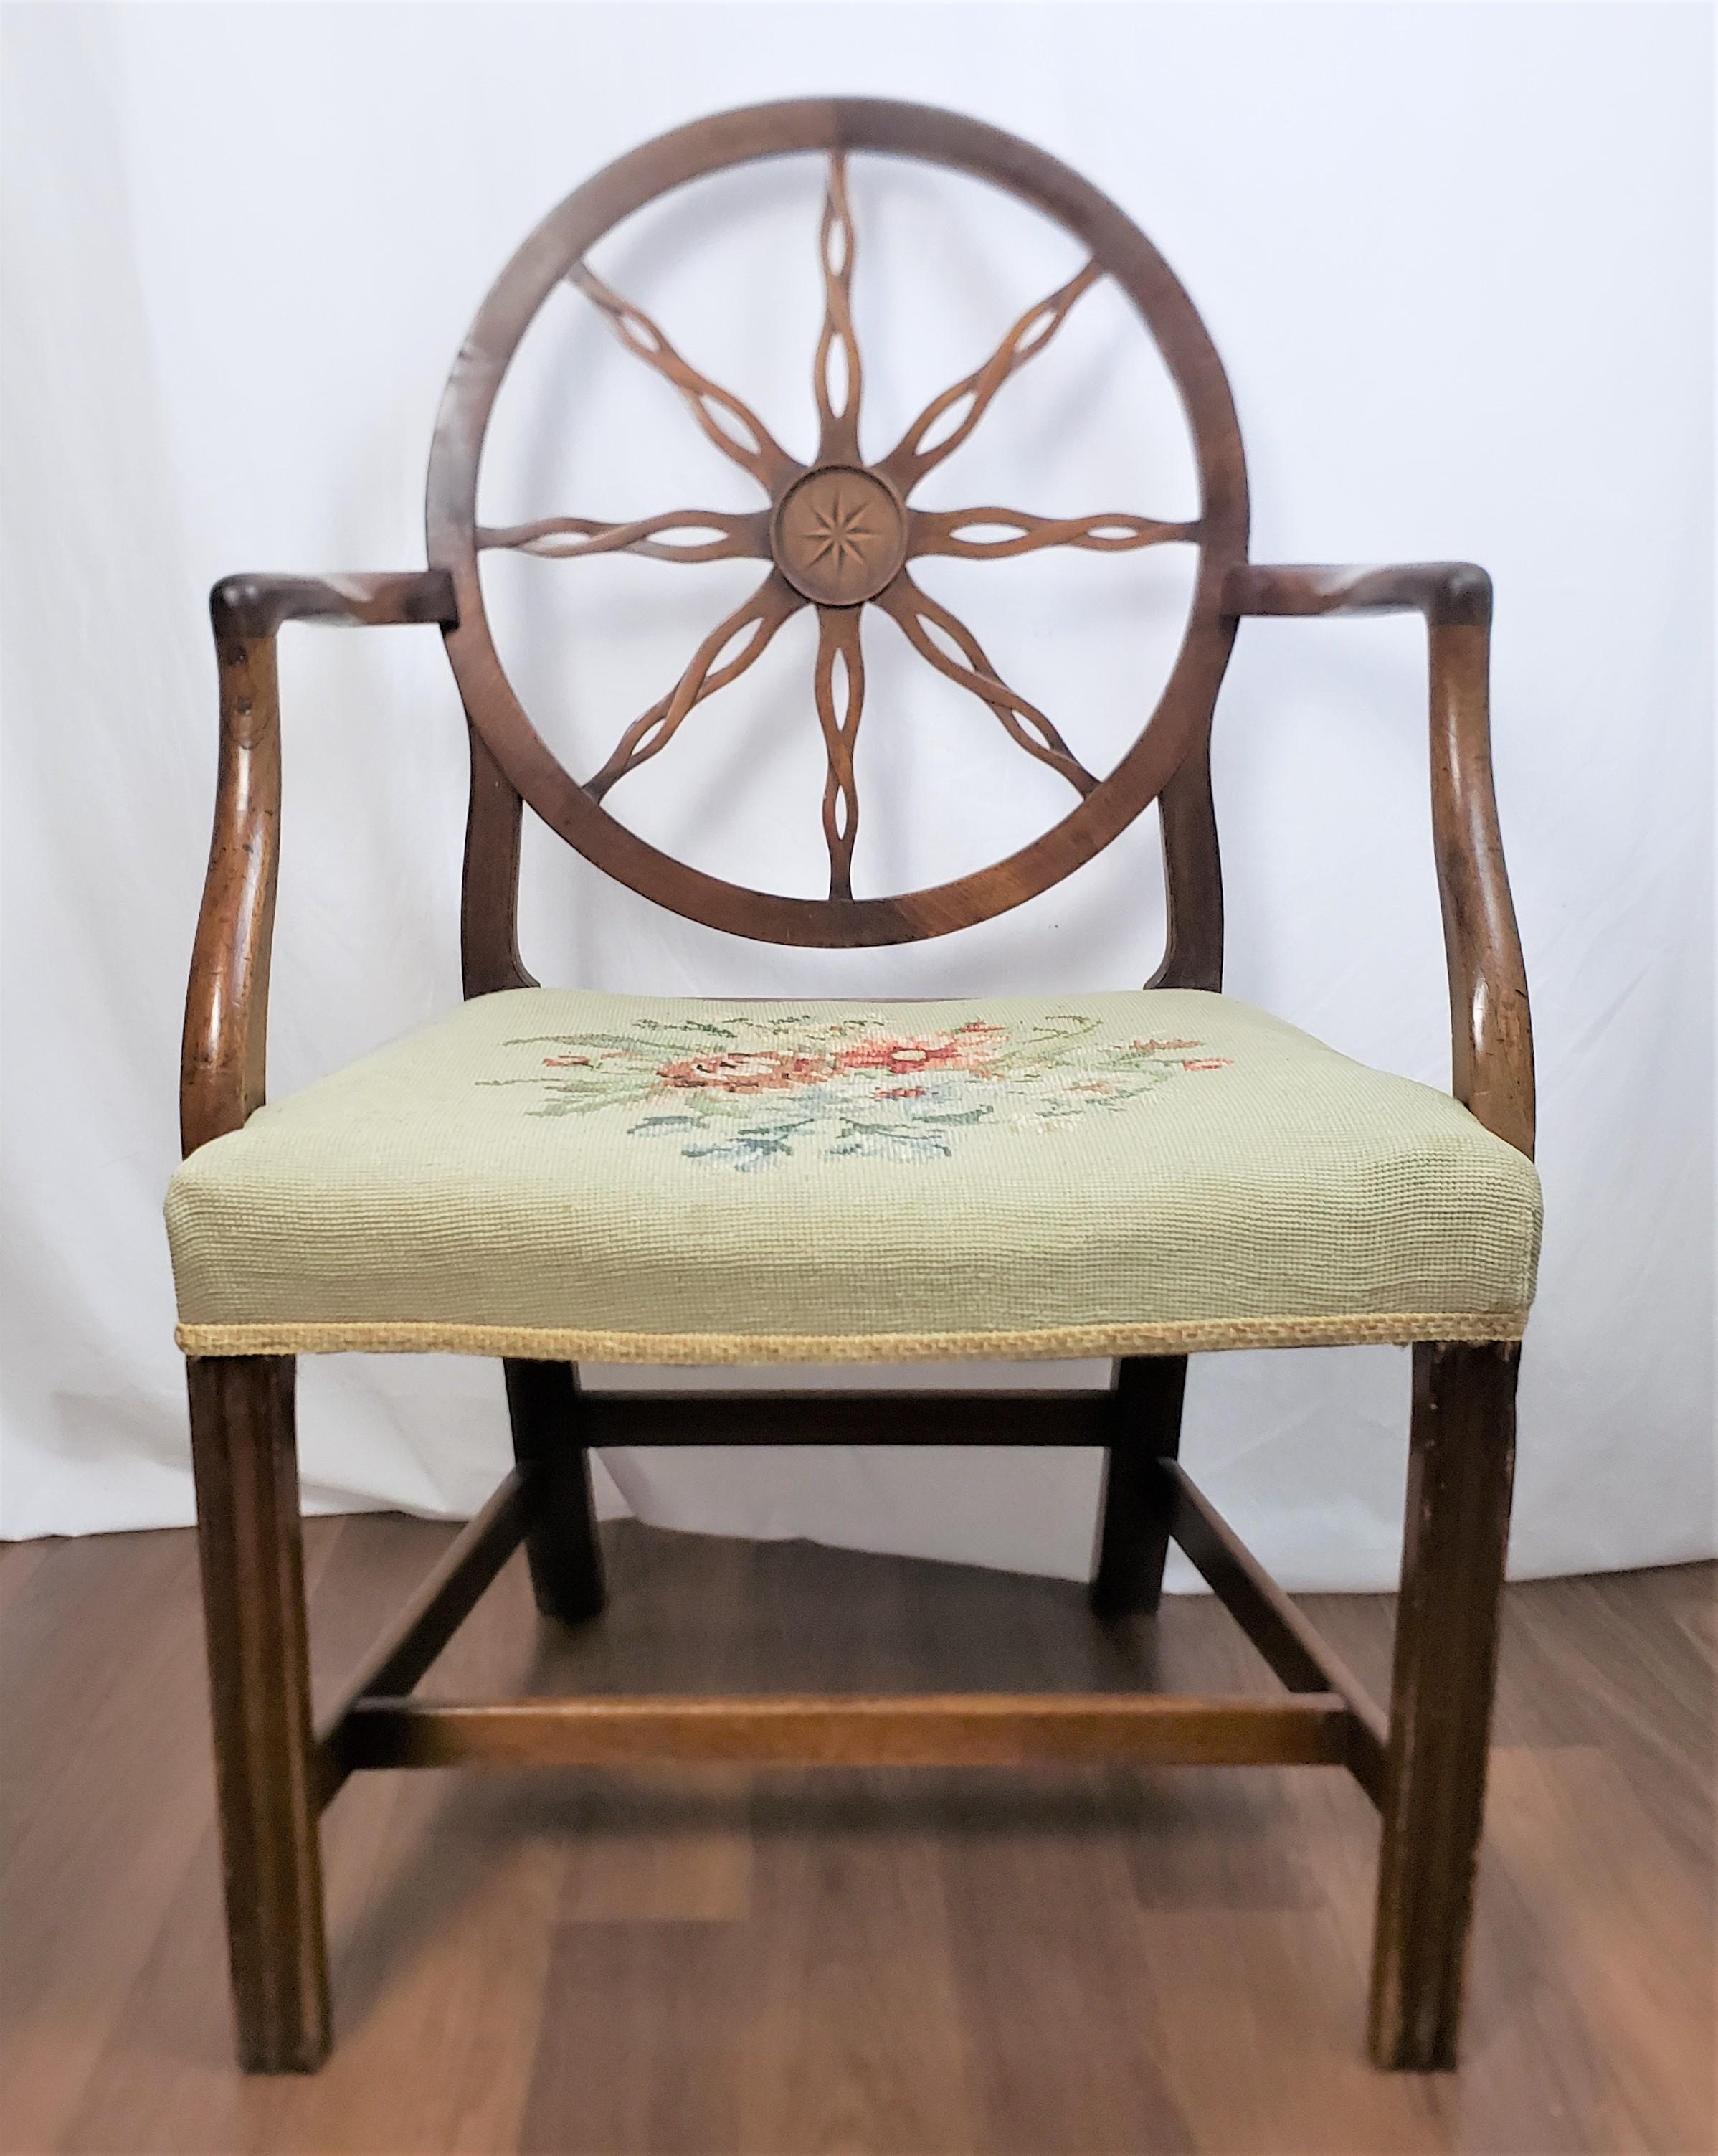 English Antique King George III Period Wheelback Armchair or Side Chair Frame For Sale